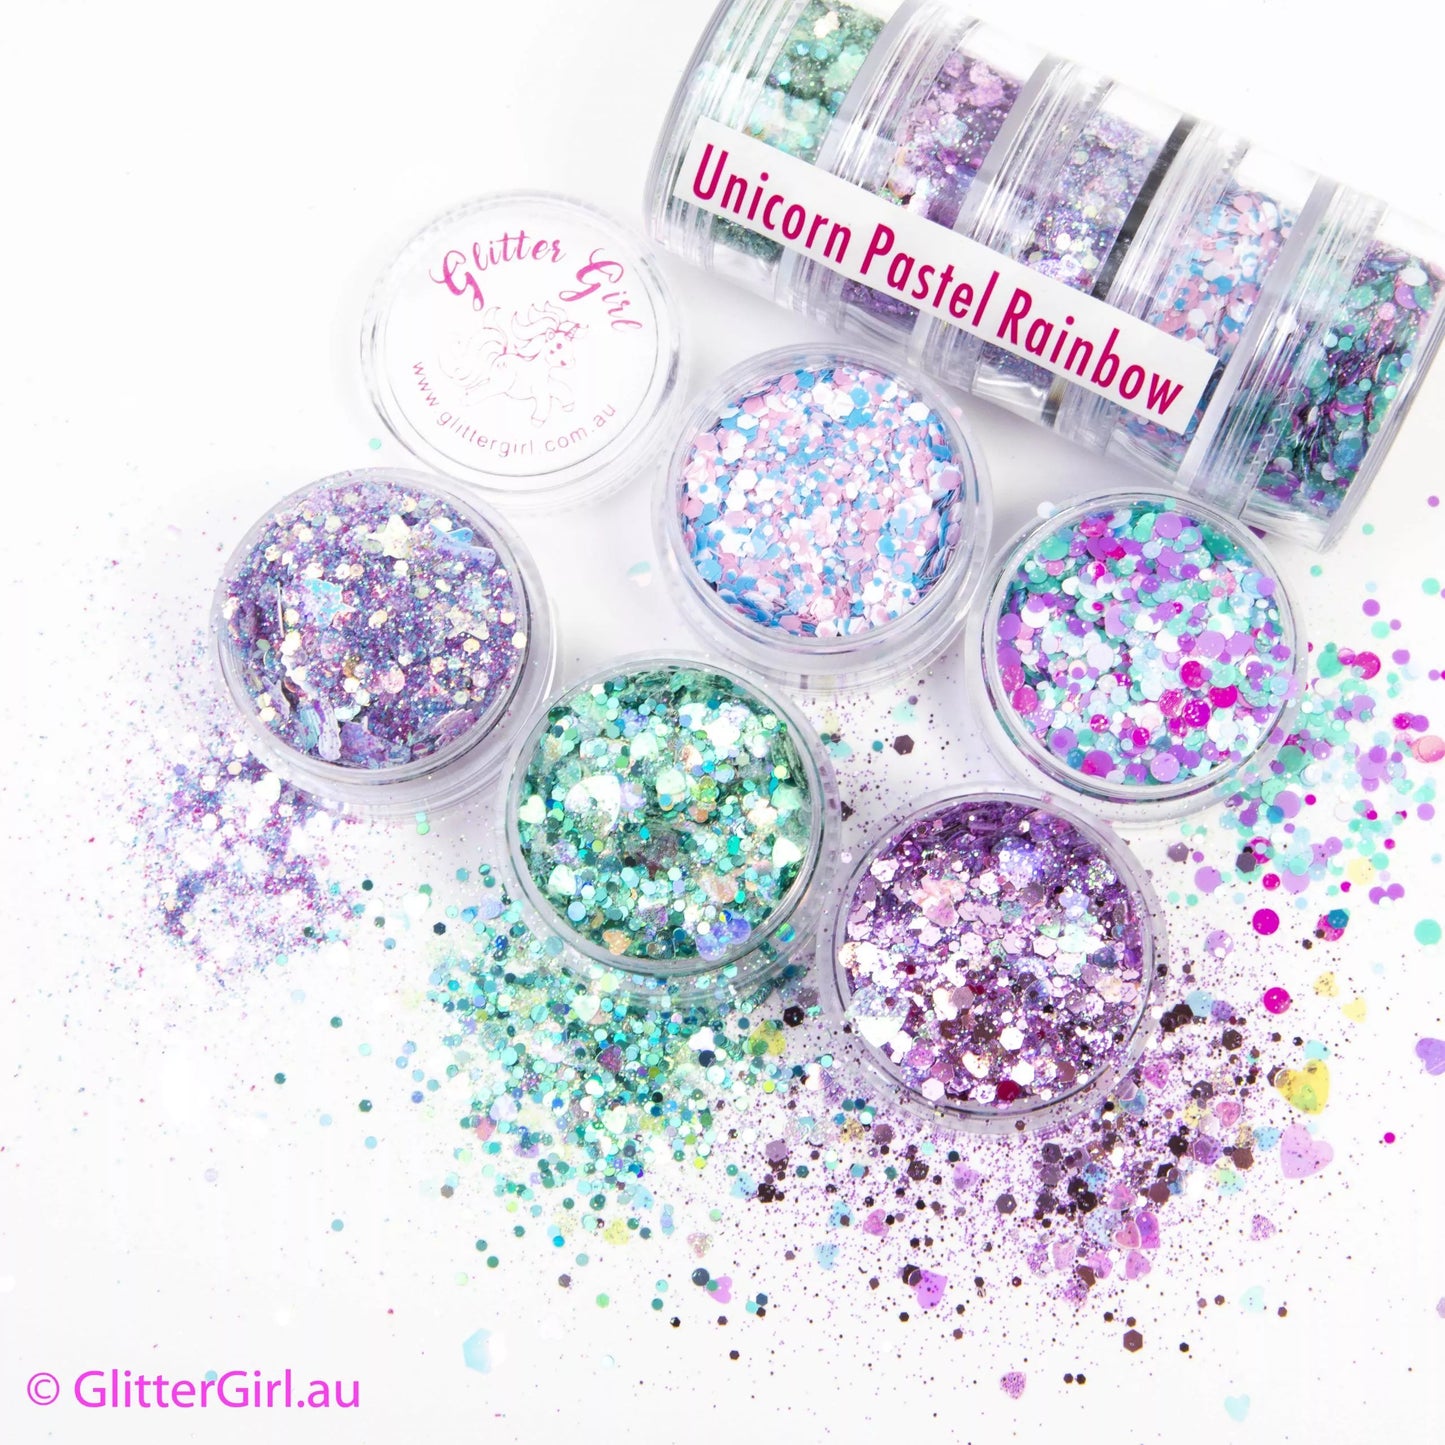 Glitter Girl- cupcake collection